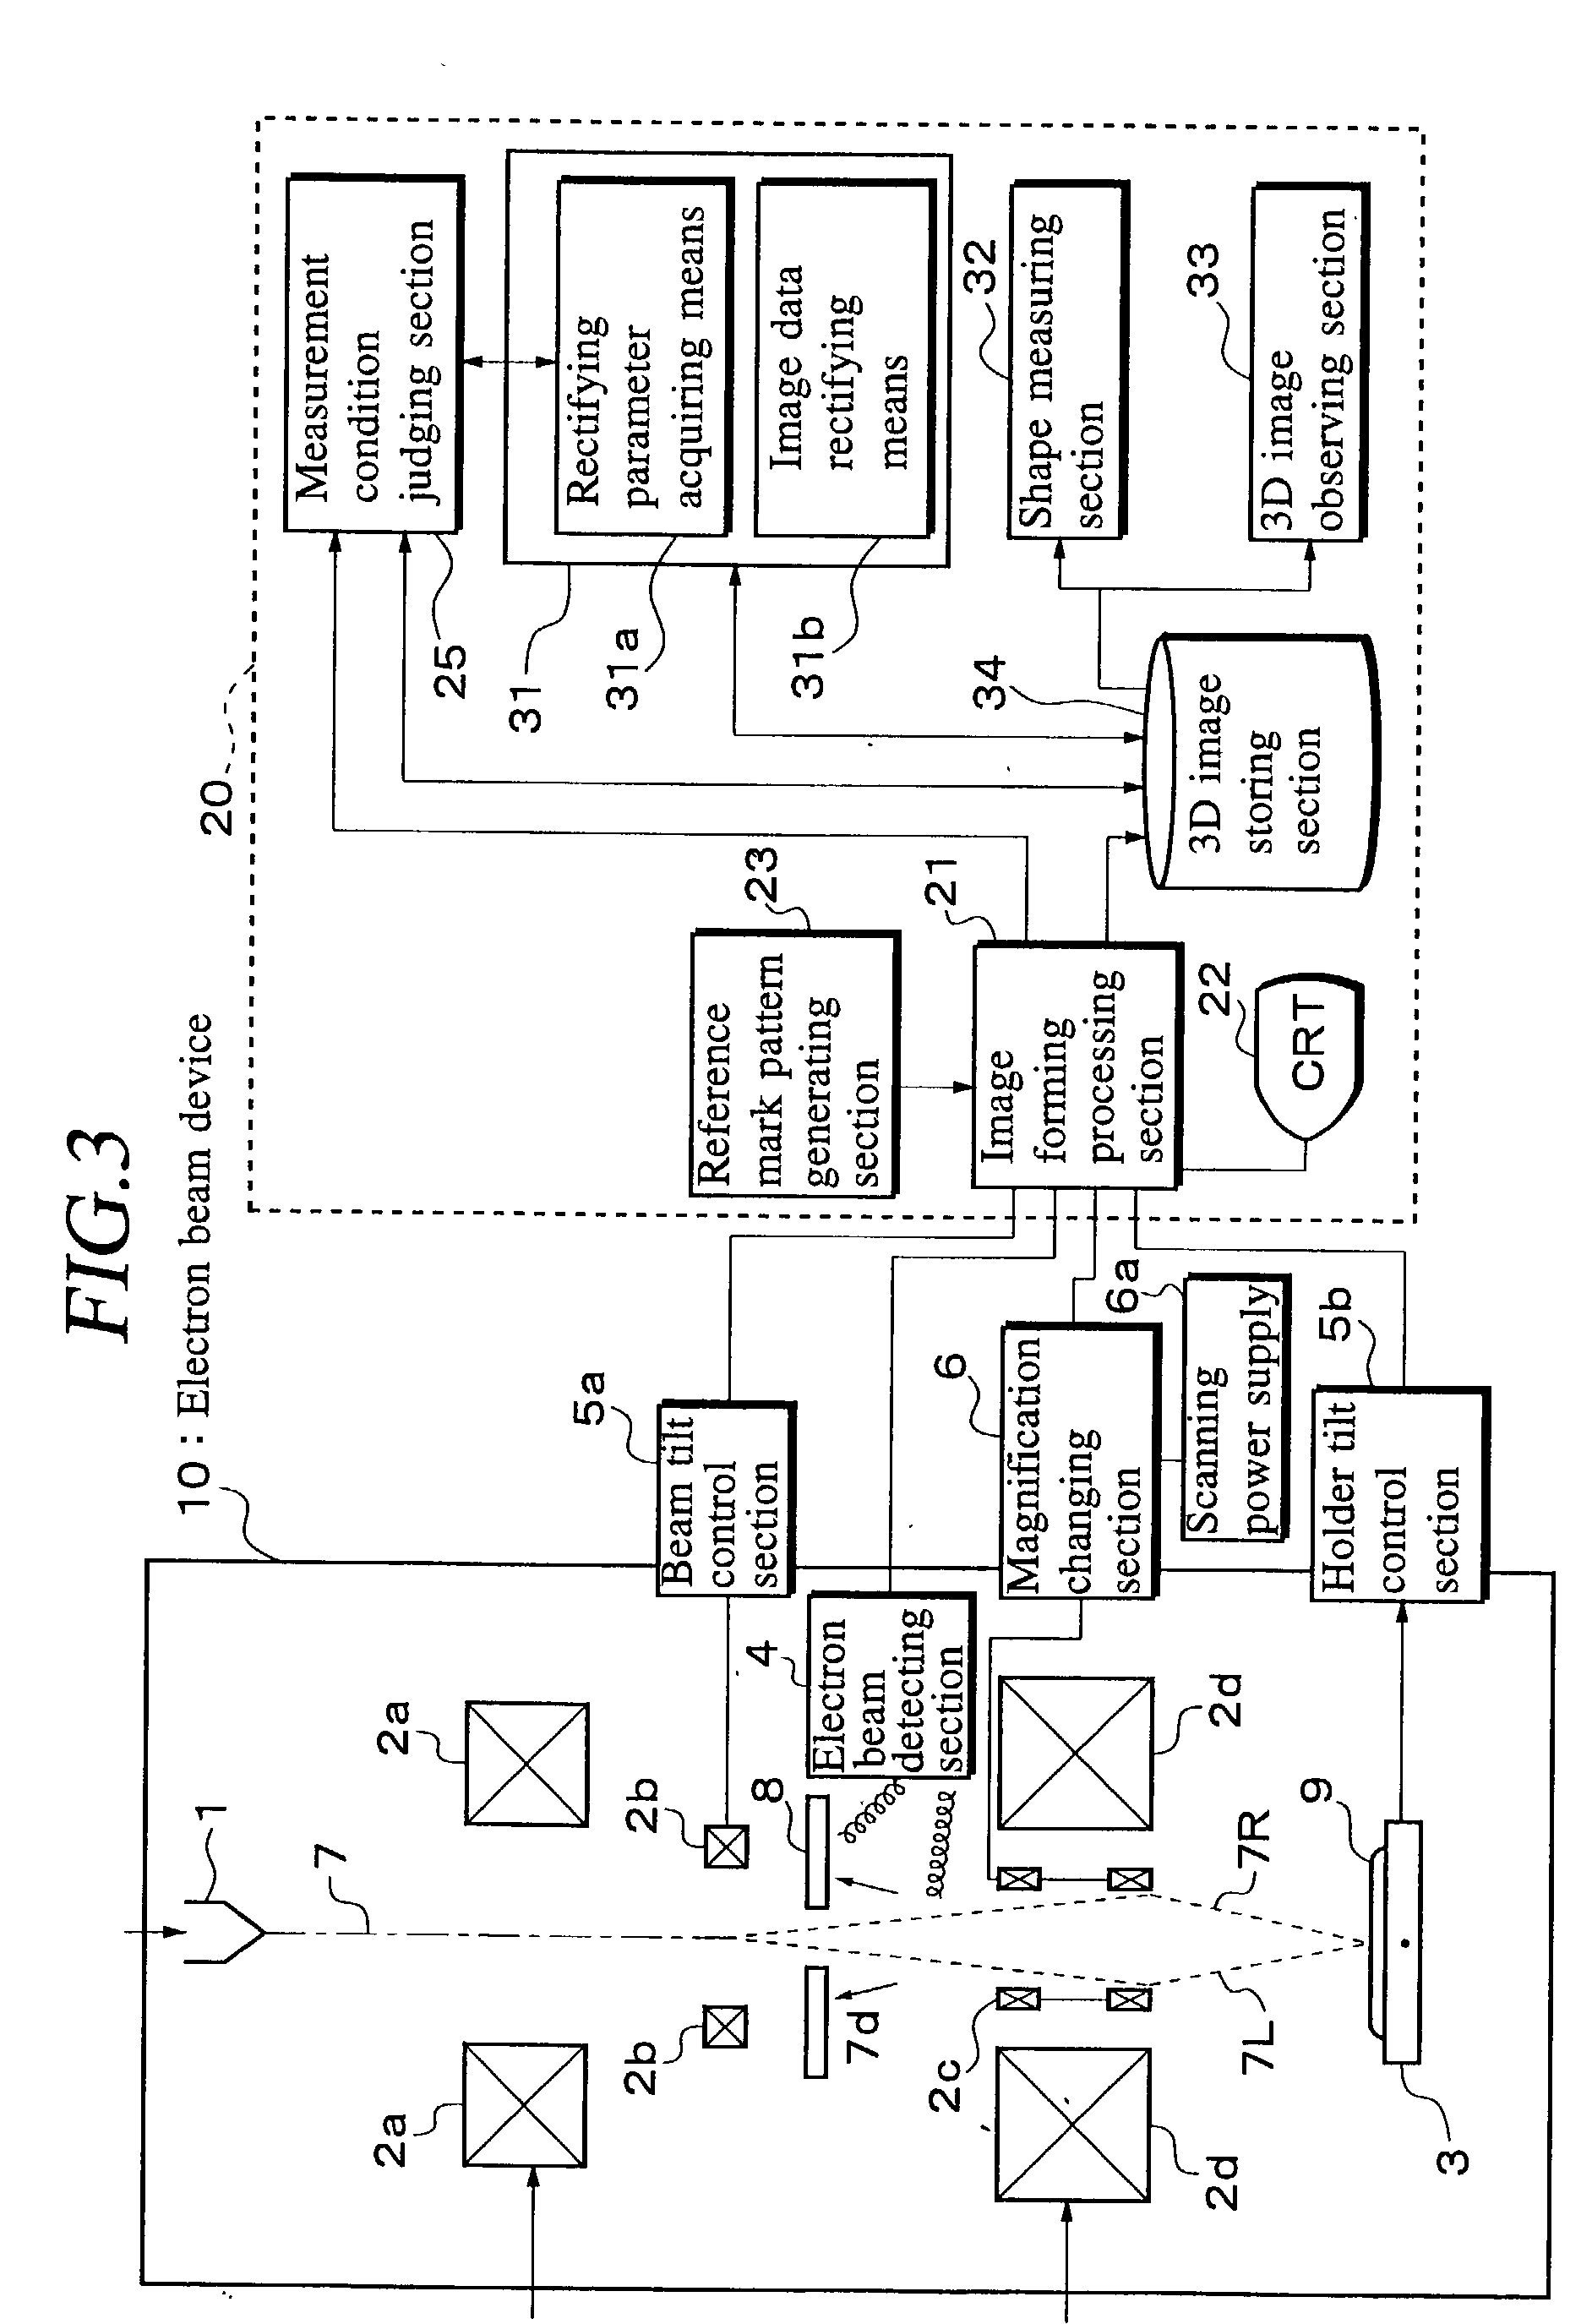 Electron beam device and method for stereoscopic measurements